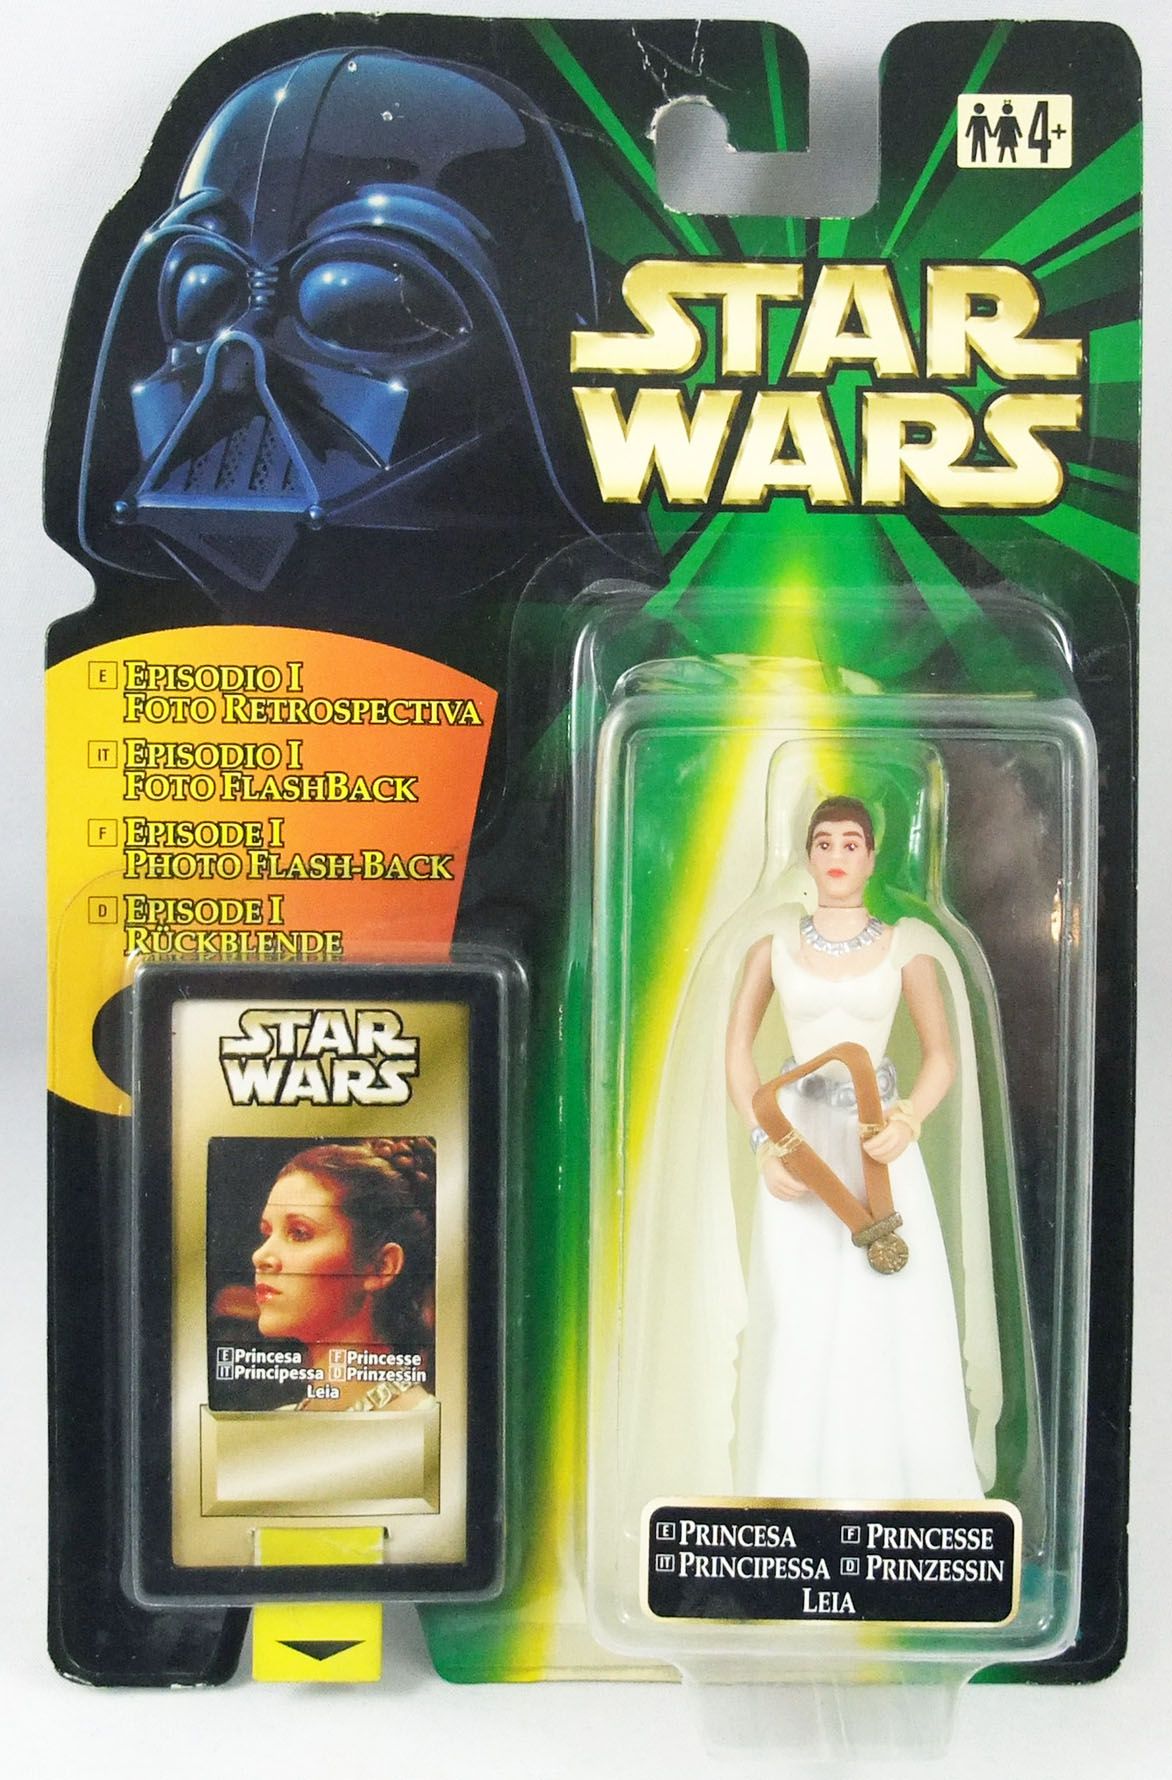 1995 Star Wars Power of the force Princess Leia Organa Action Figure VGC 